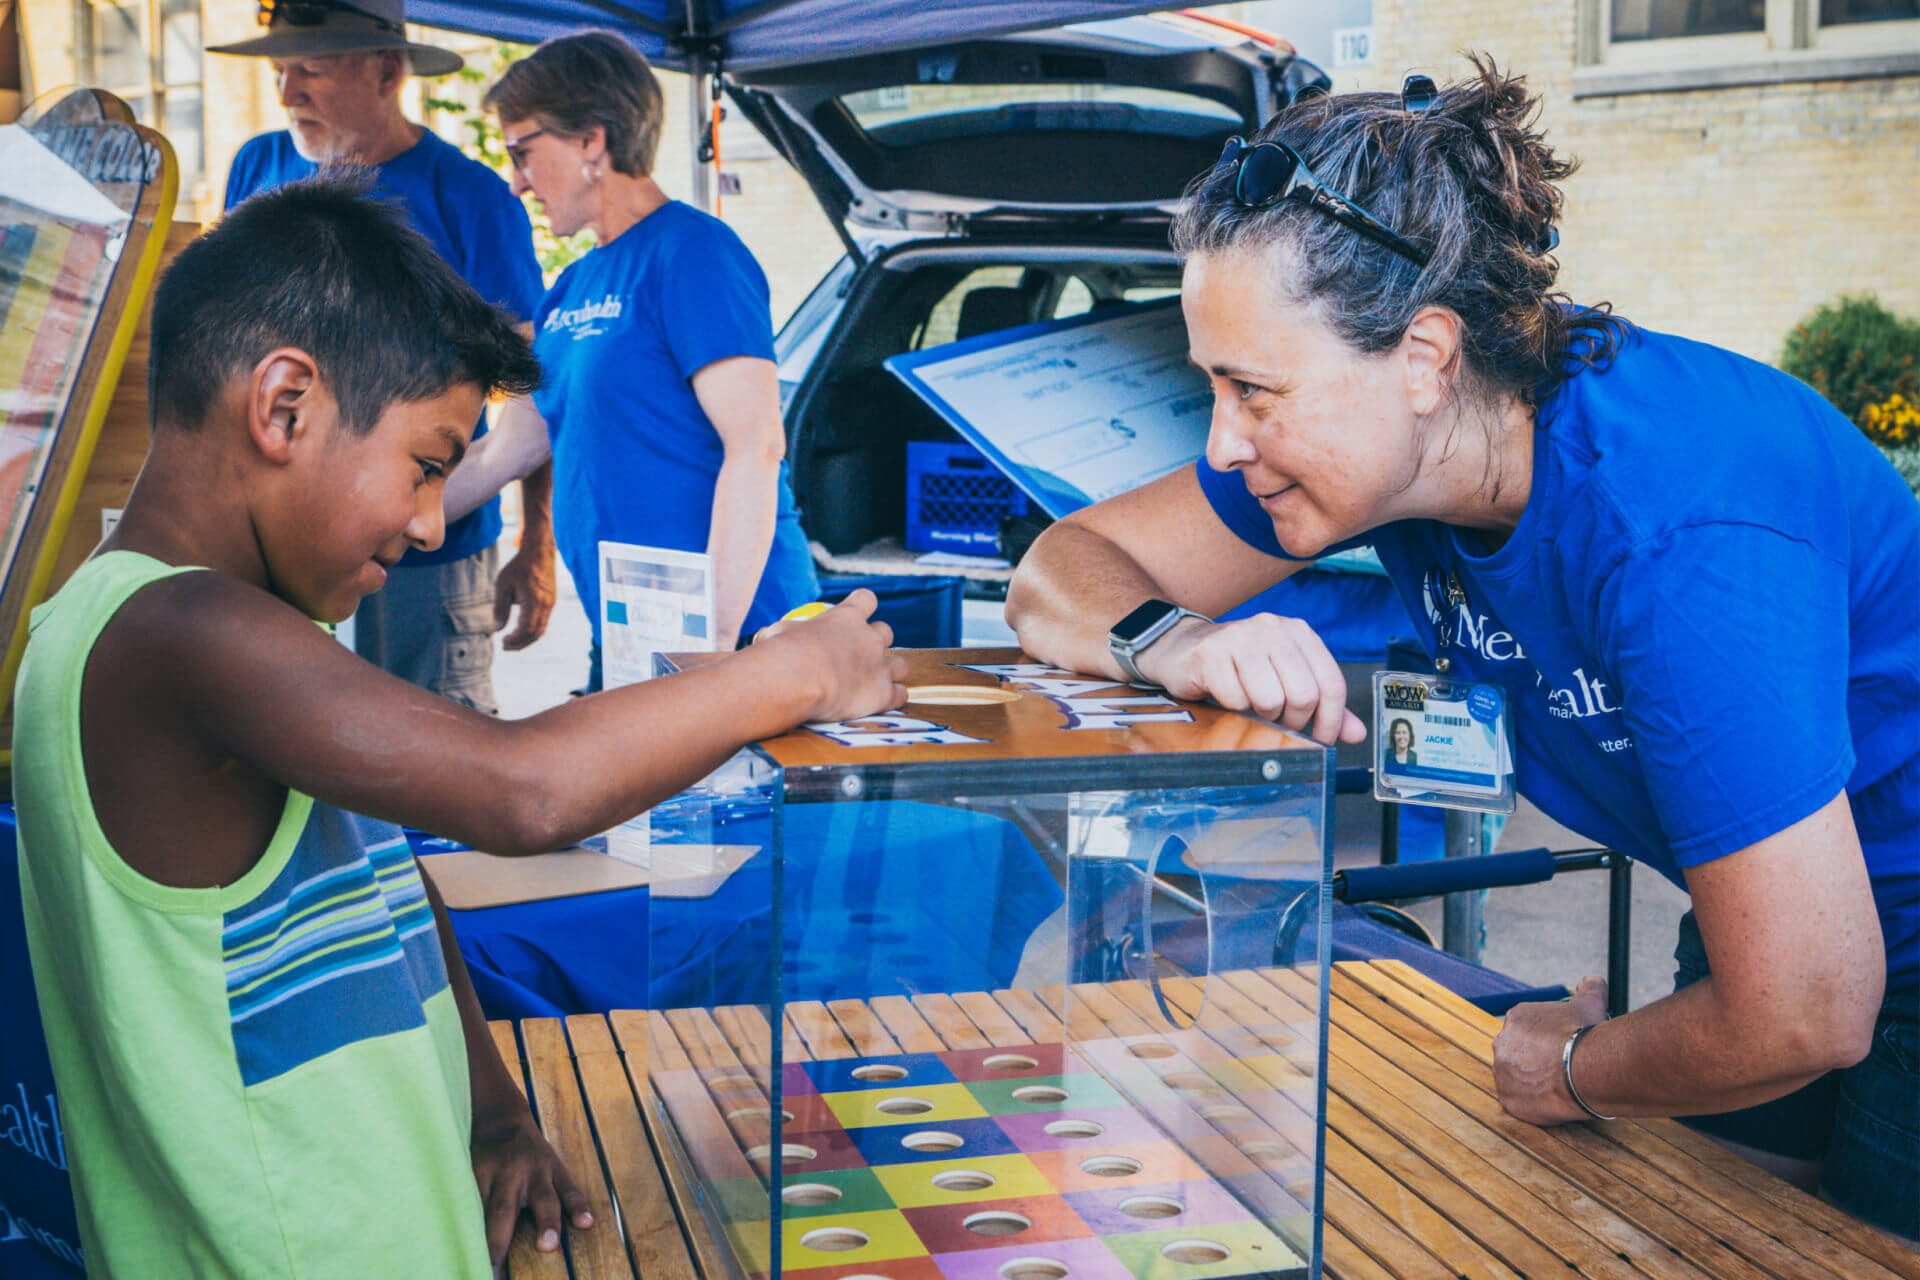 A Mercyhealth volunteer helps a young boy play a game during a festival in downtown Janesville